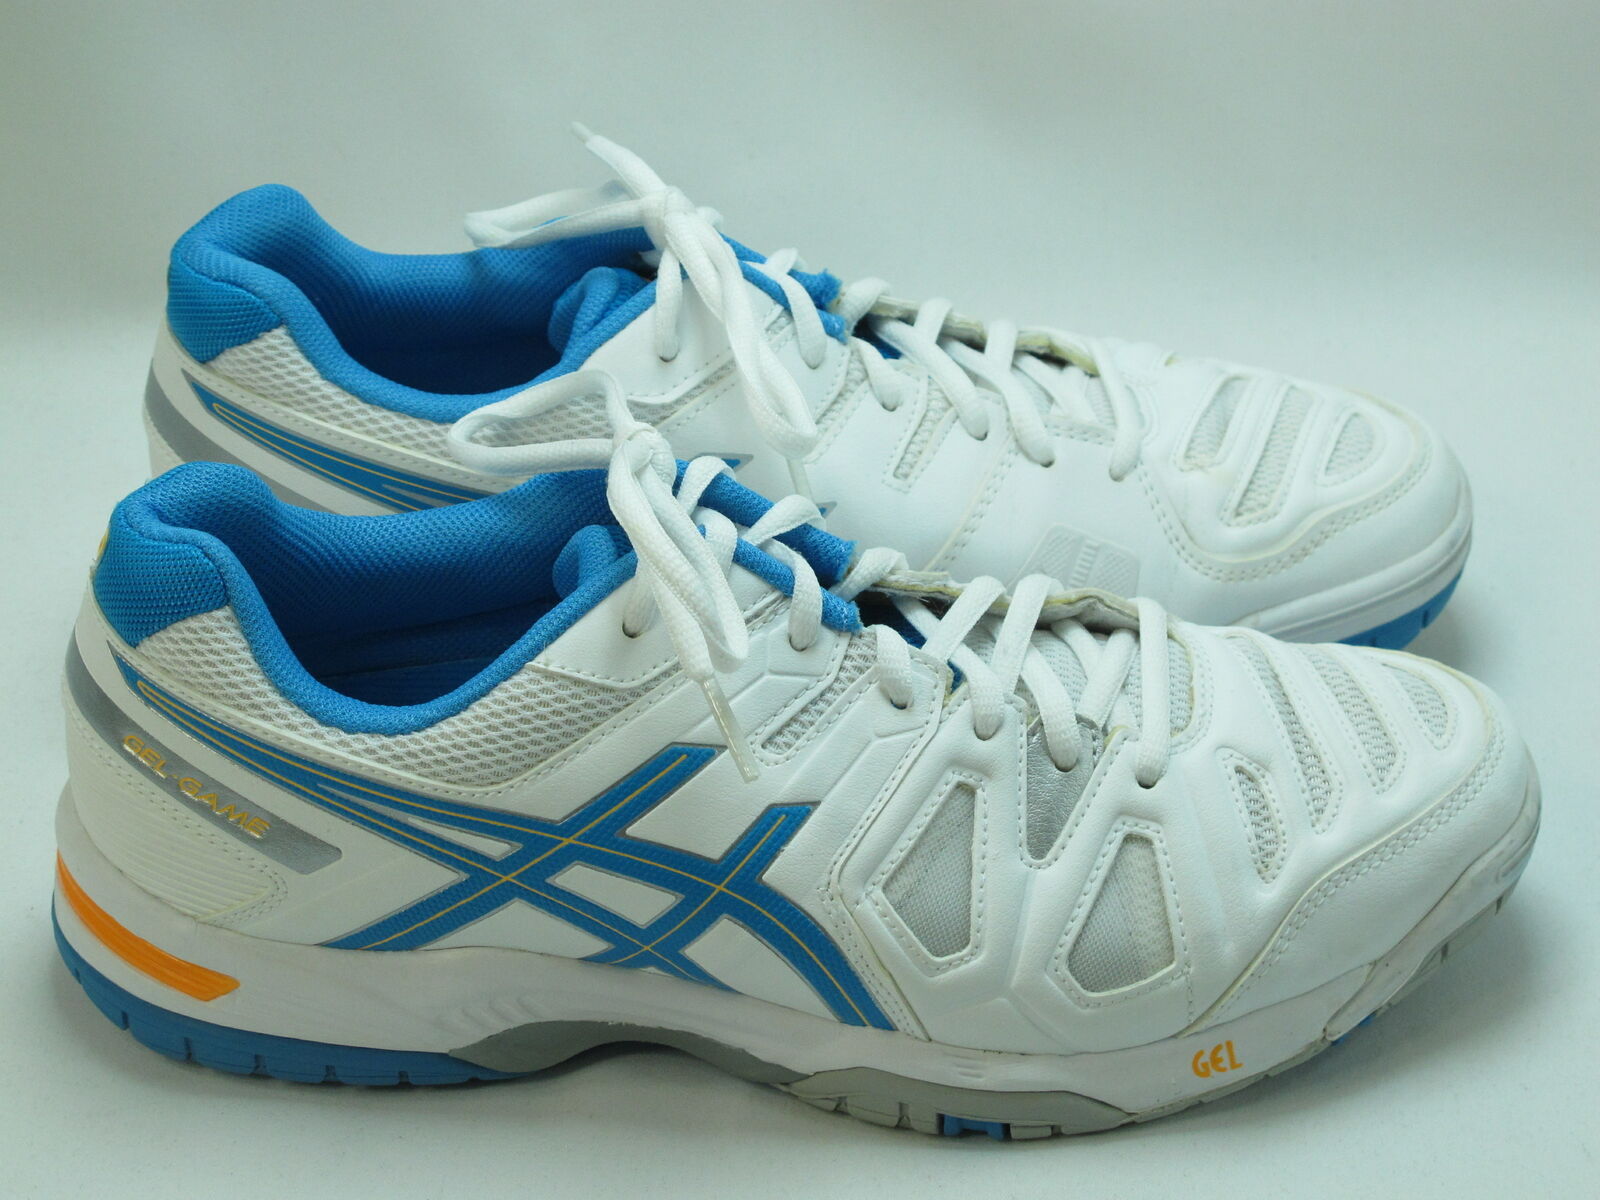 ASICS Gel Game 5 Tennis Shoes Women's Size and 50 items